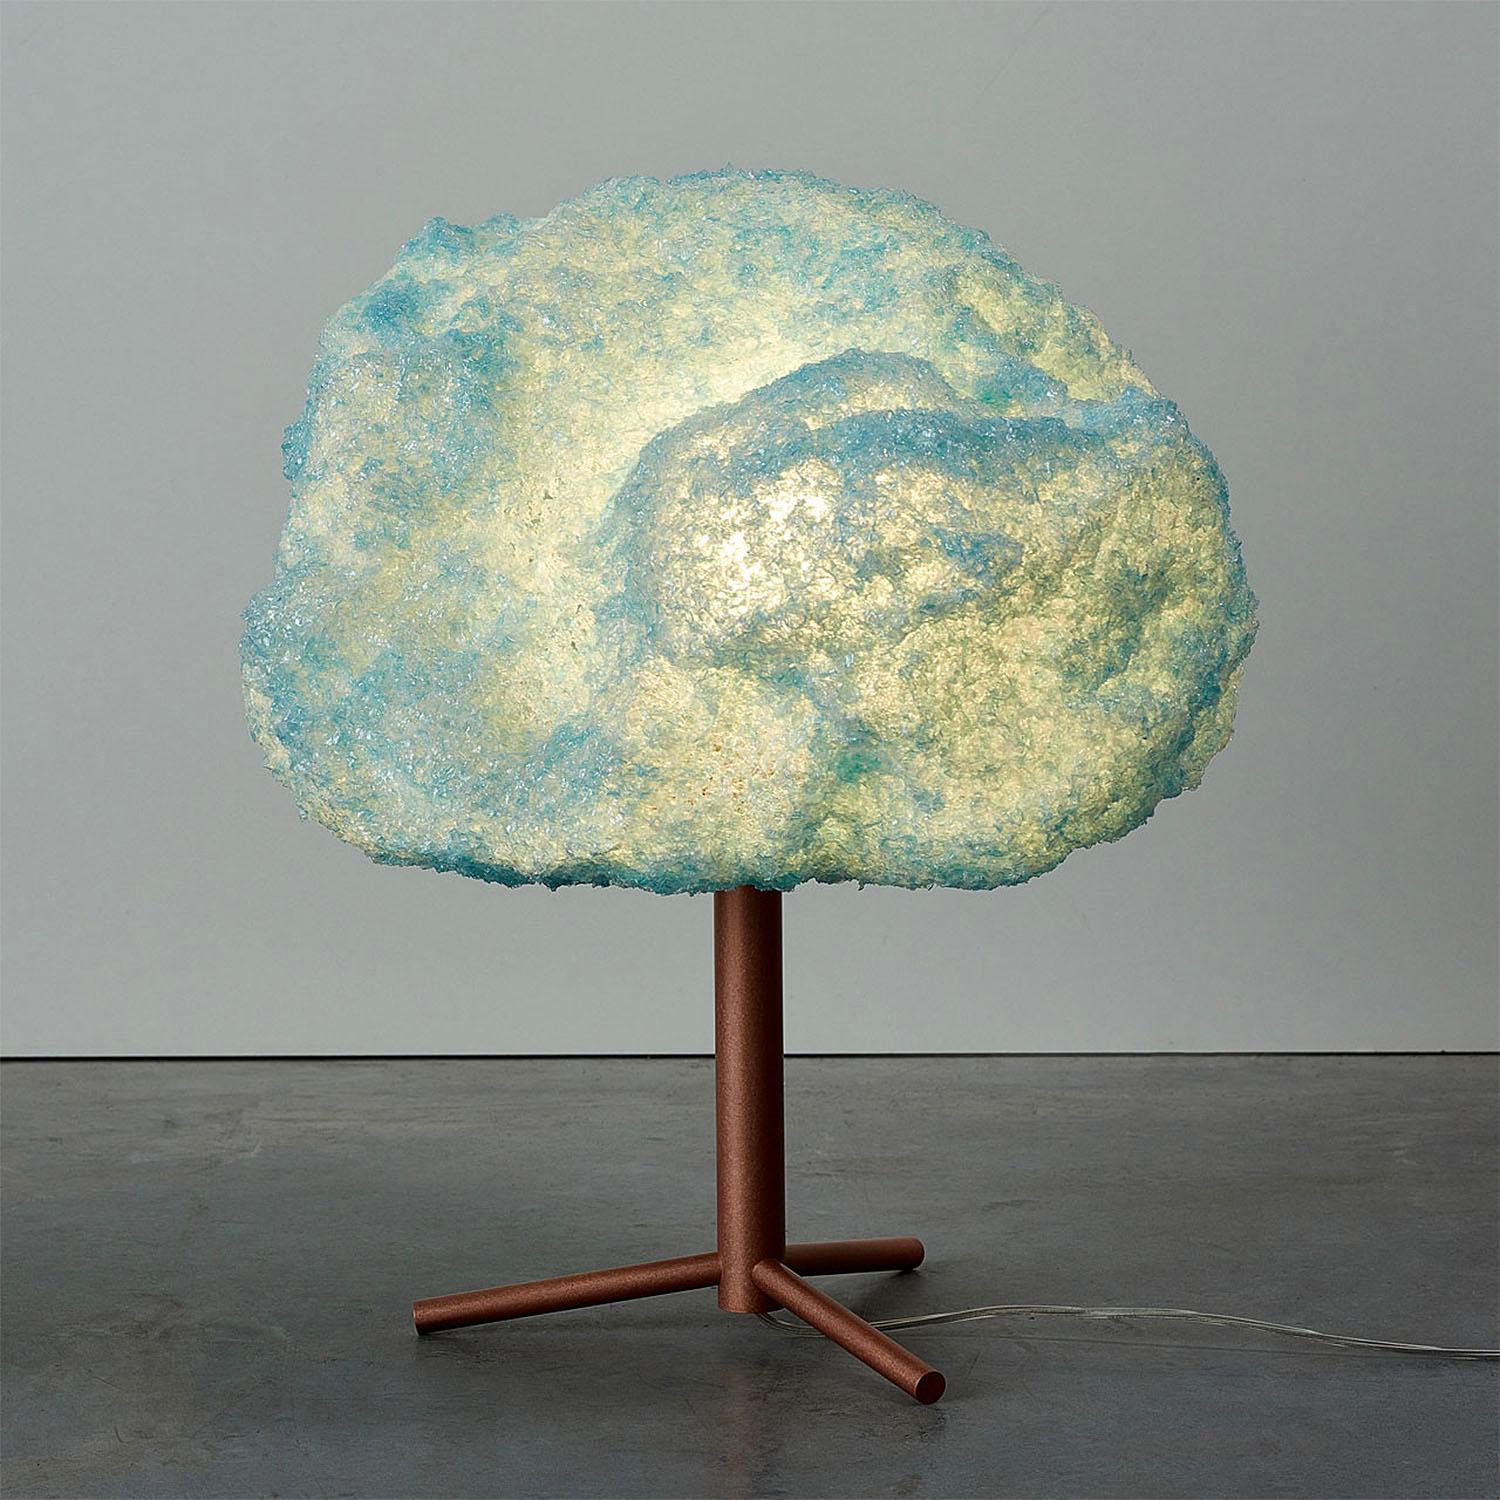 Contemporary Blue Table Lamp - Storm Light Copper by Johannes Hemann
Material: polycarbonate, copper
Dimensions: Ø 38 x H 45 cm
Material options: white, grey, blue
The Storm Series is by its concept the purest example of a process-design, where the